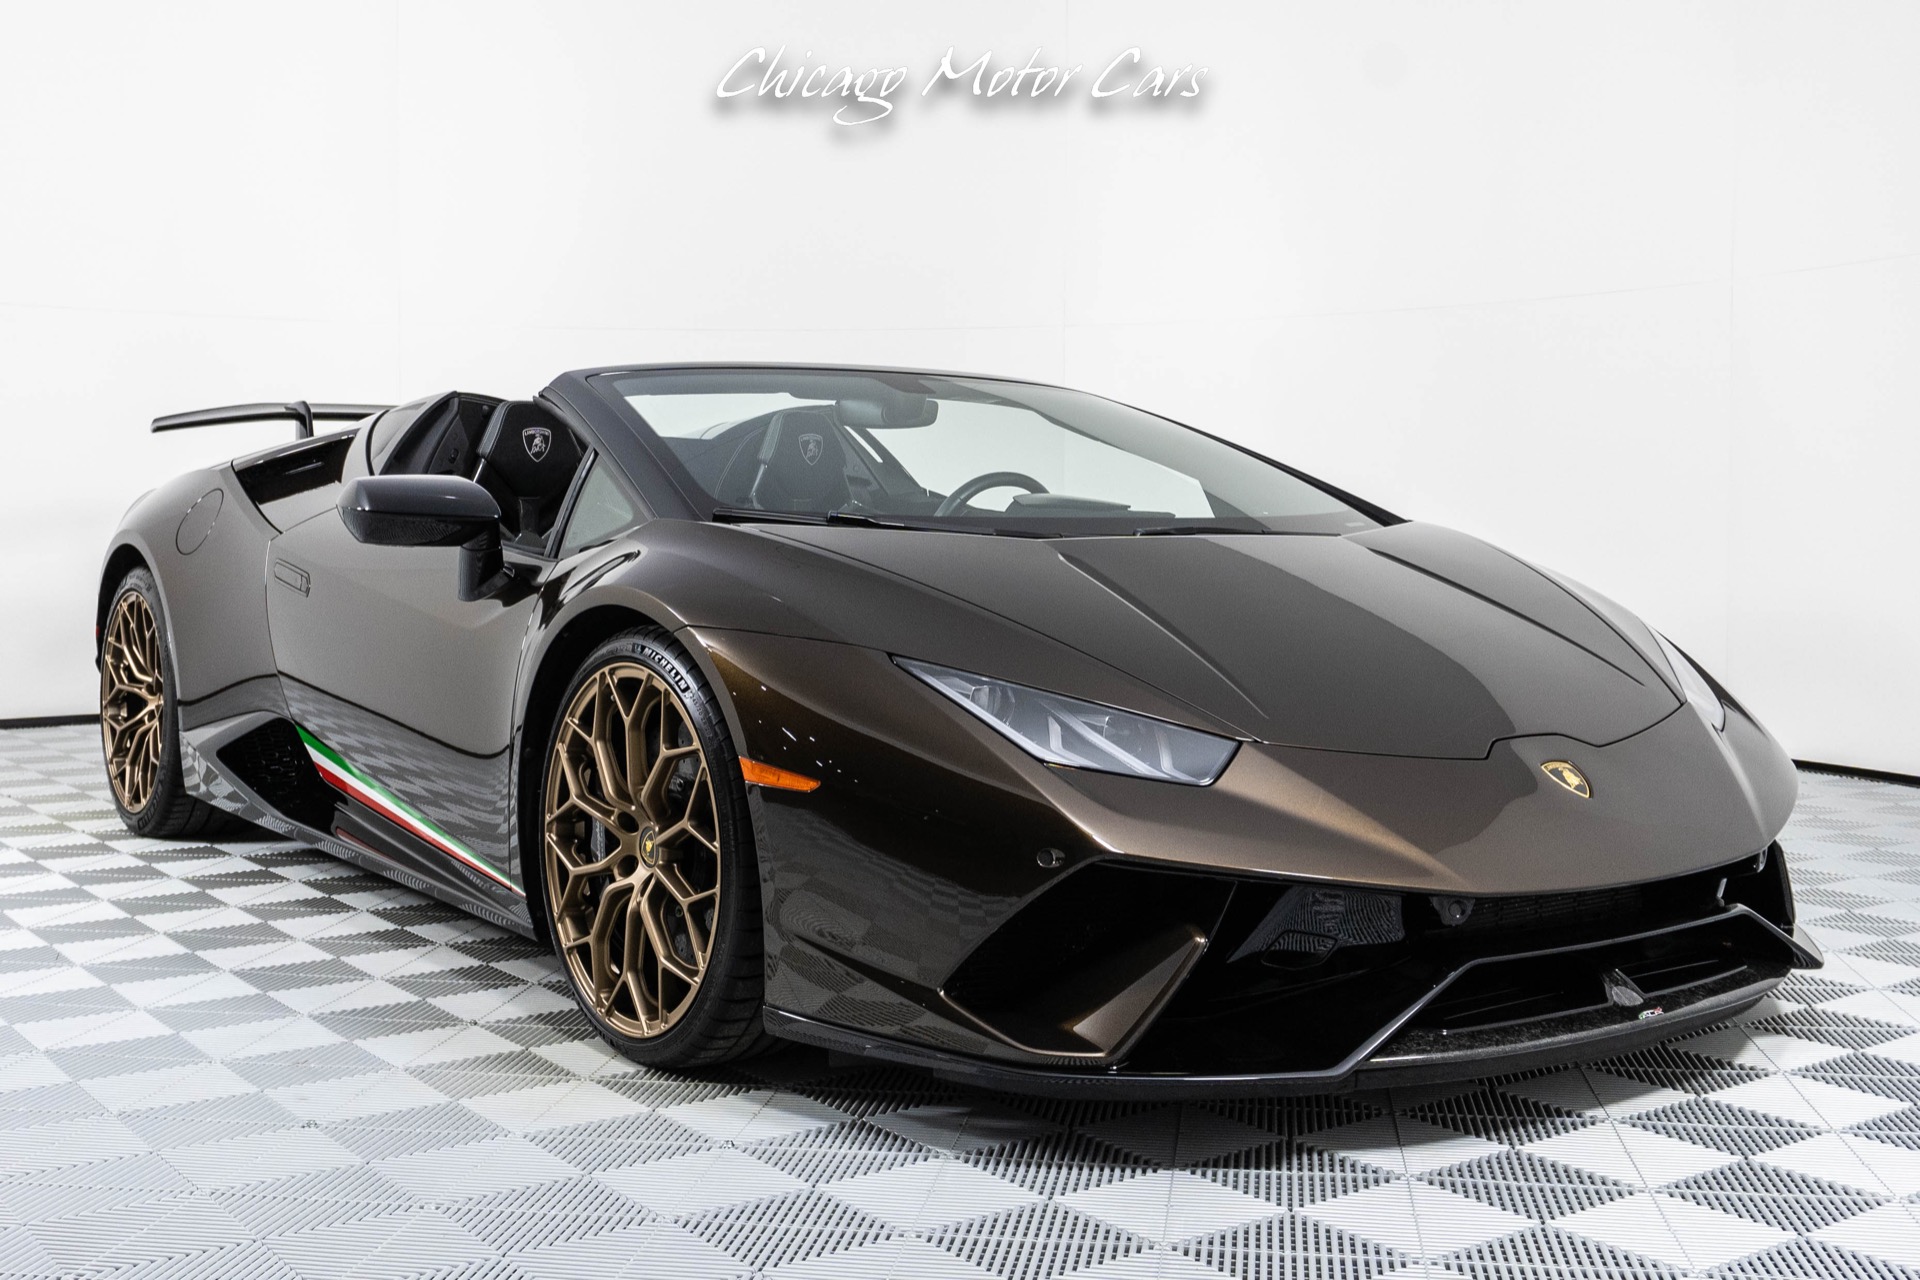 Used-2018-Lamborghini-Huracan-Performante-Spyder-1-of-1-Build-Ad-Personam-Stunning-Spec-Only-4k-Miles-Huge-MSRP-Loaded